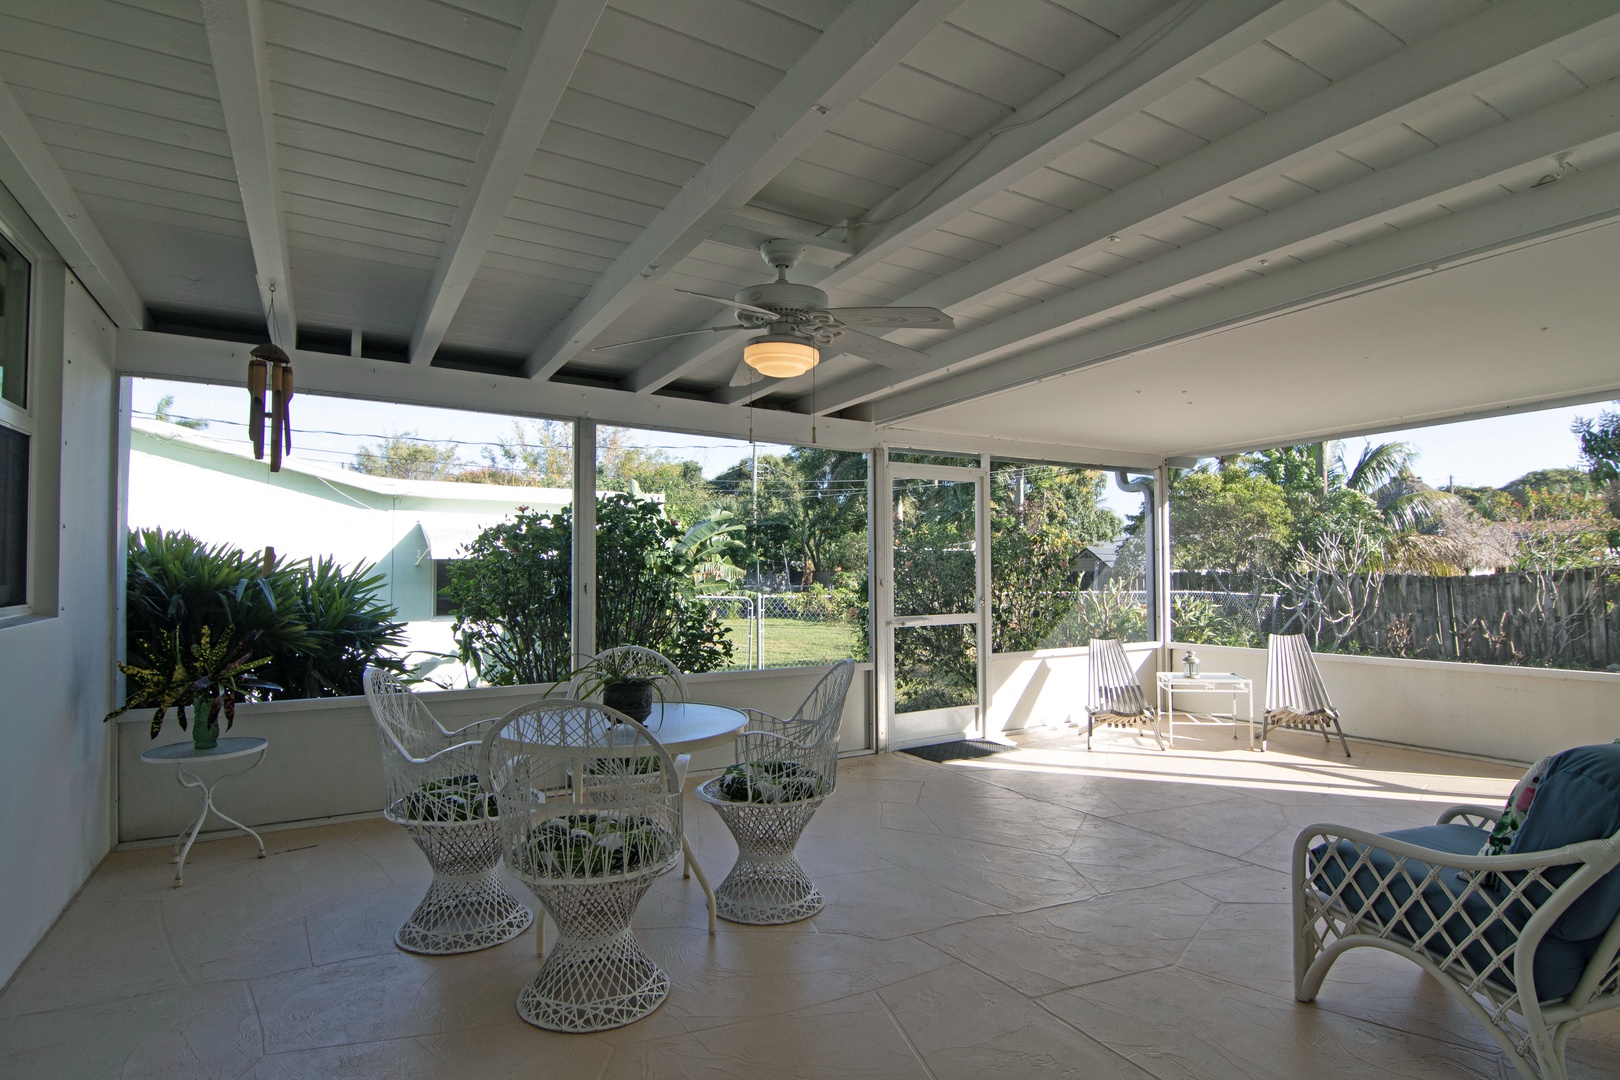 Dine alfresco or lounge the day away in the shaded lanai